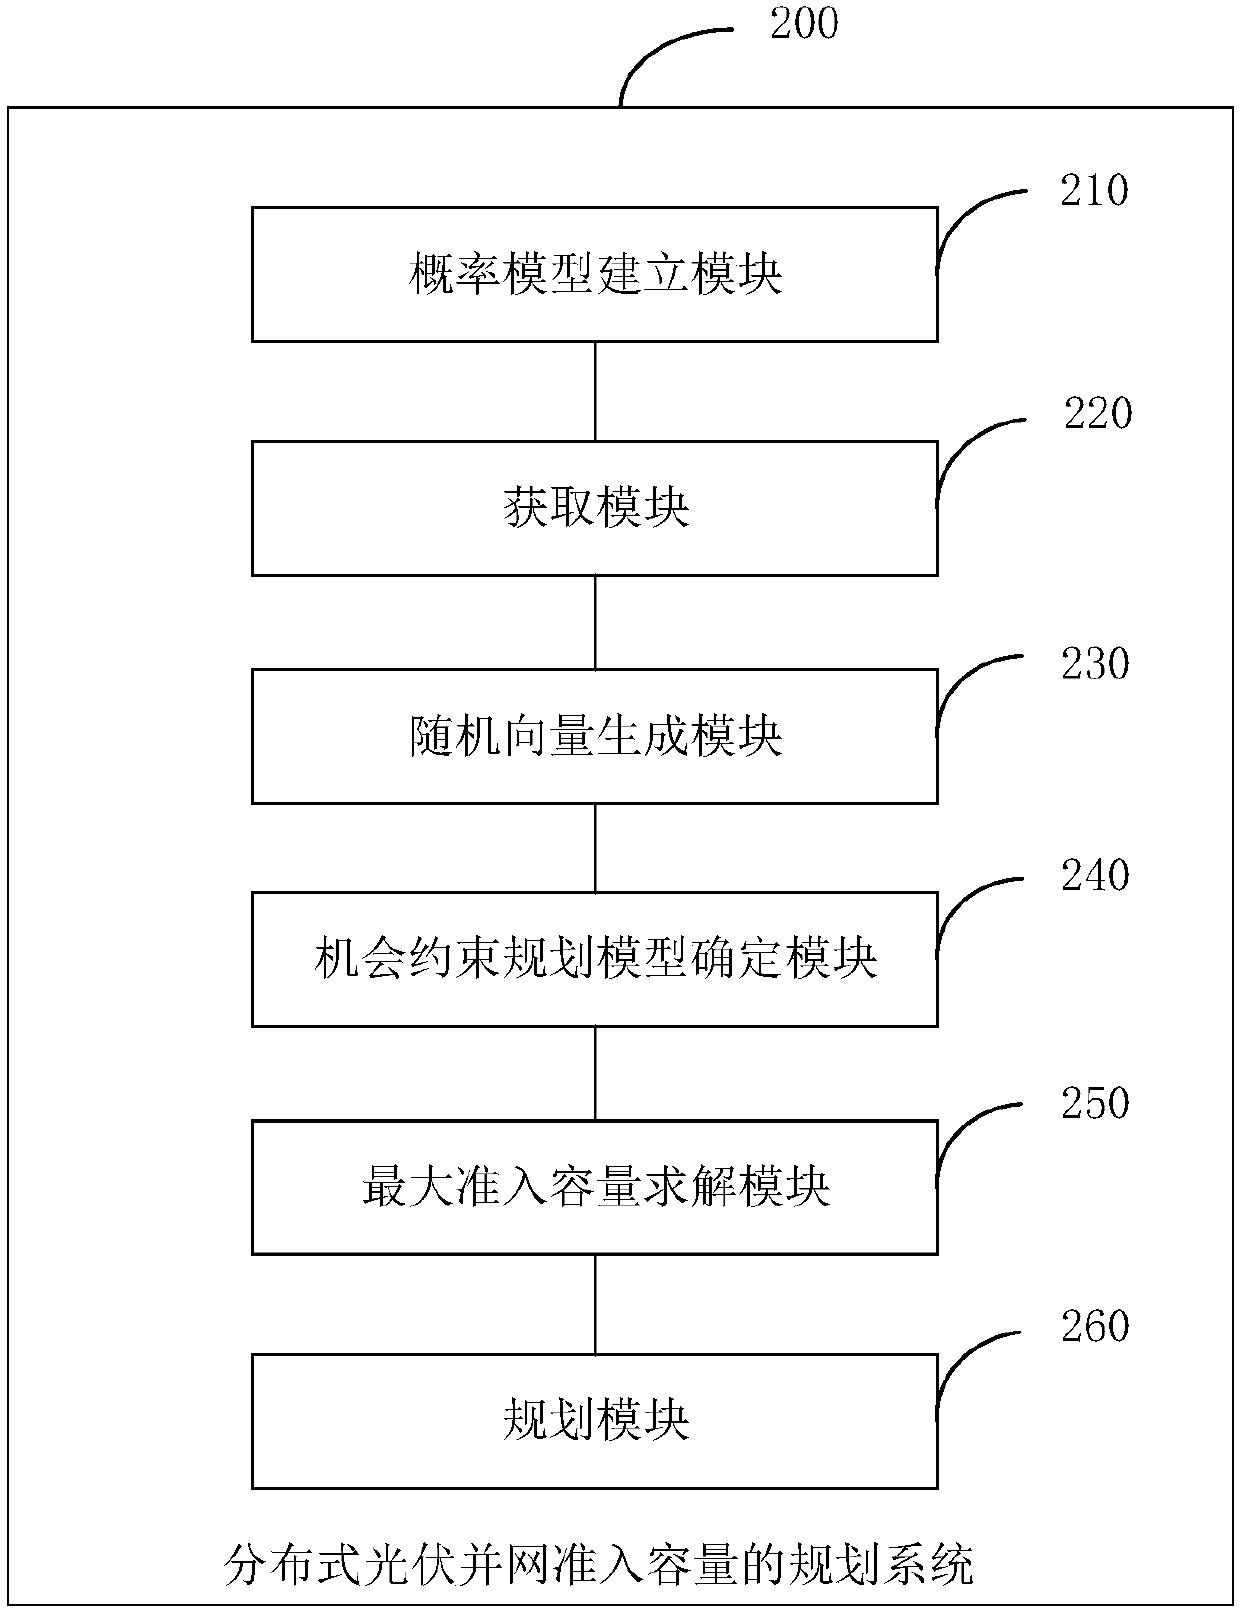 Programming method and system for distributed photovoltaic grid-connected penetration level